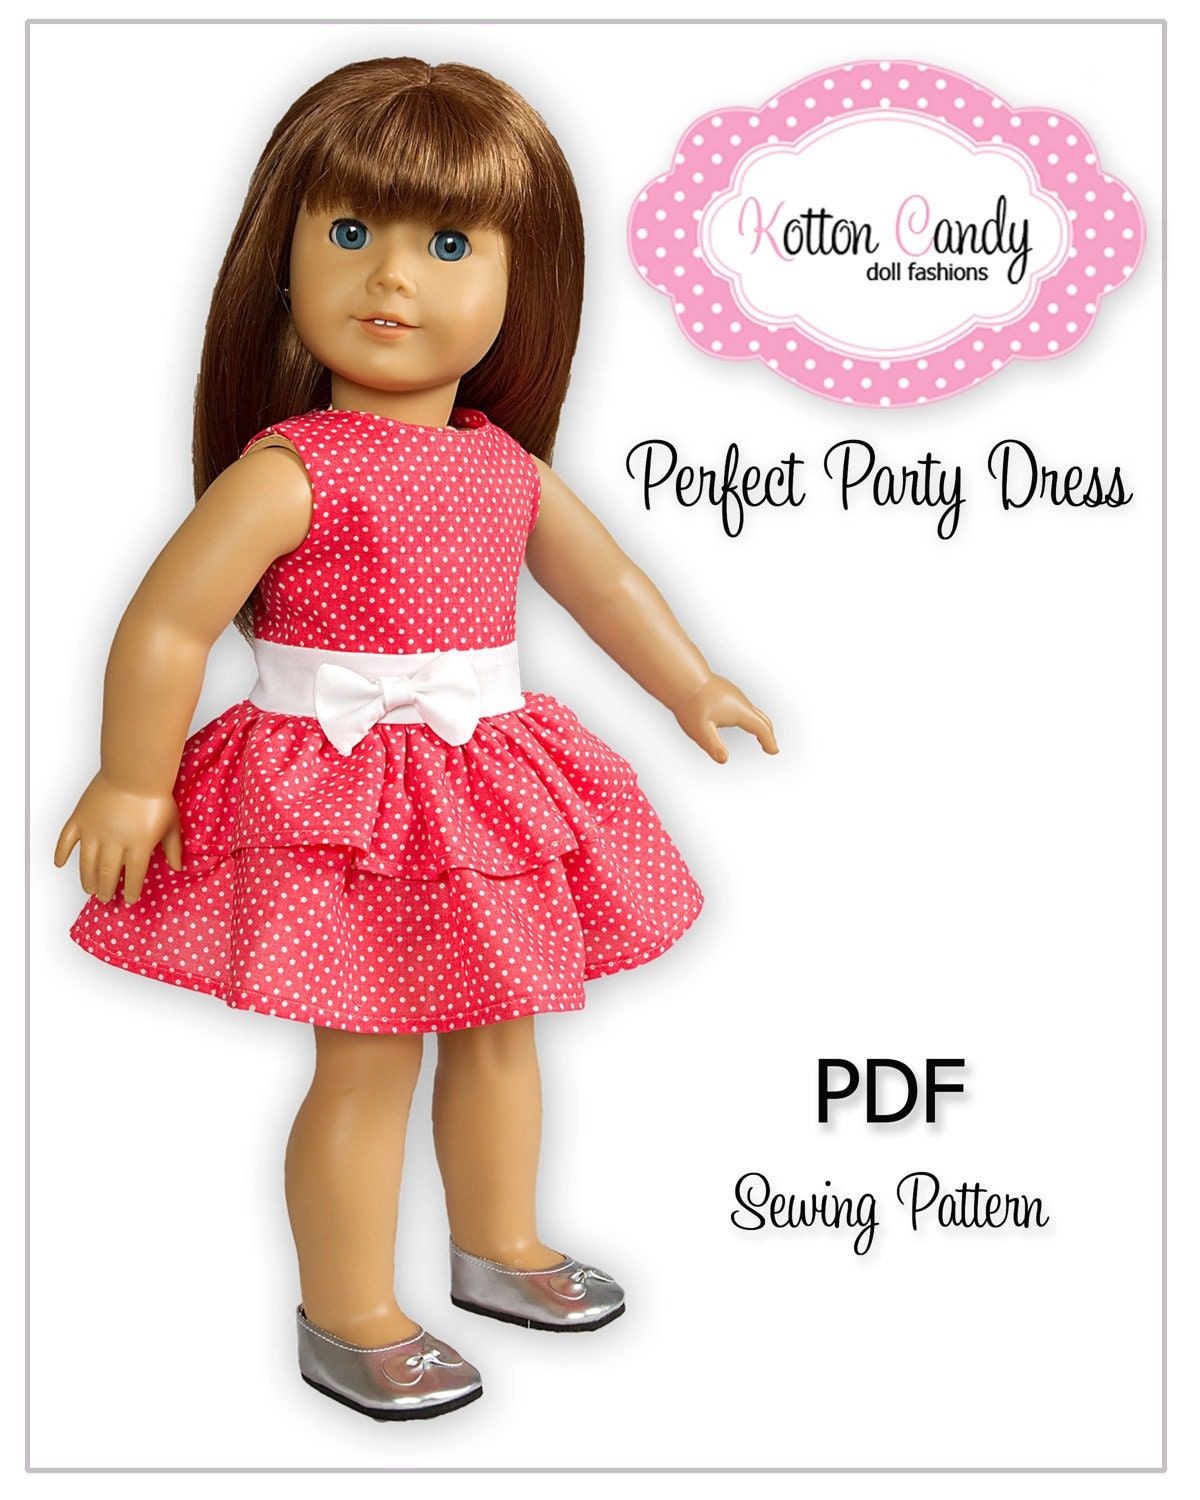 PDF Sewing Pattern for 18 American Girl by KottonCandyPatterns - PDF Sewing Pattern for 18 American Girl by KottonCandyPatterns -   American Girl Patterns